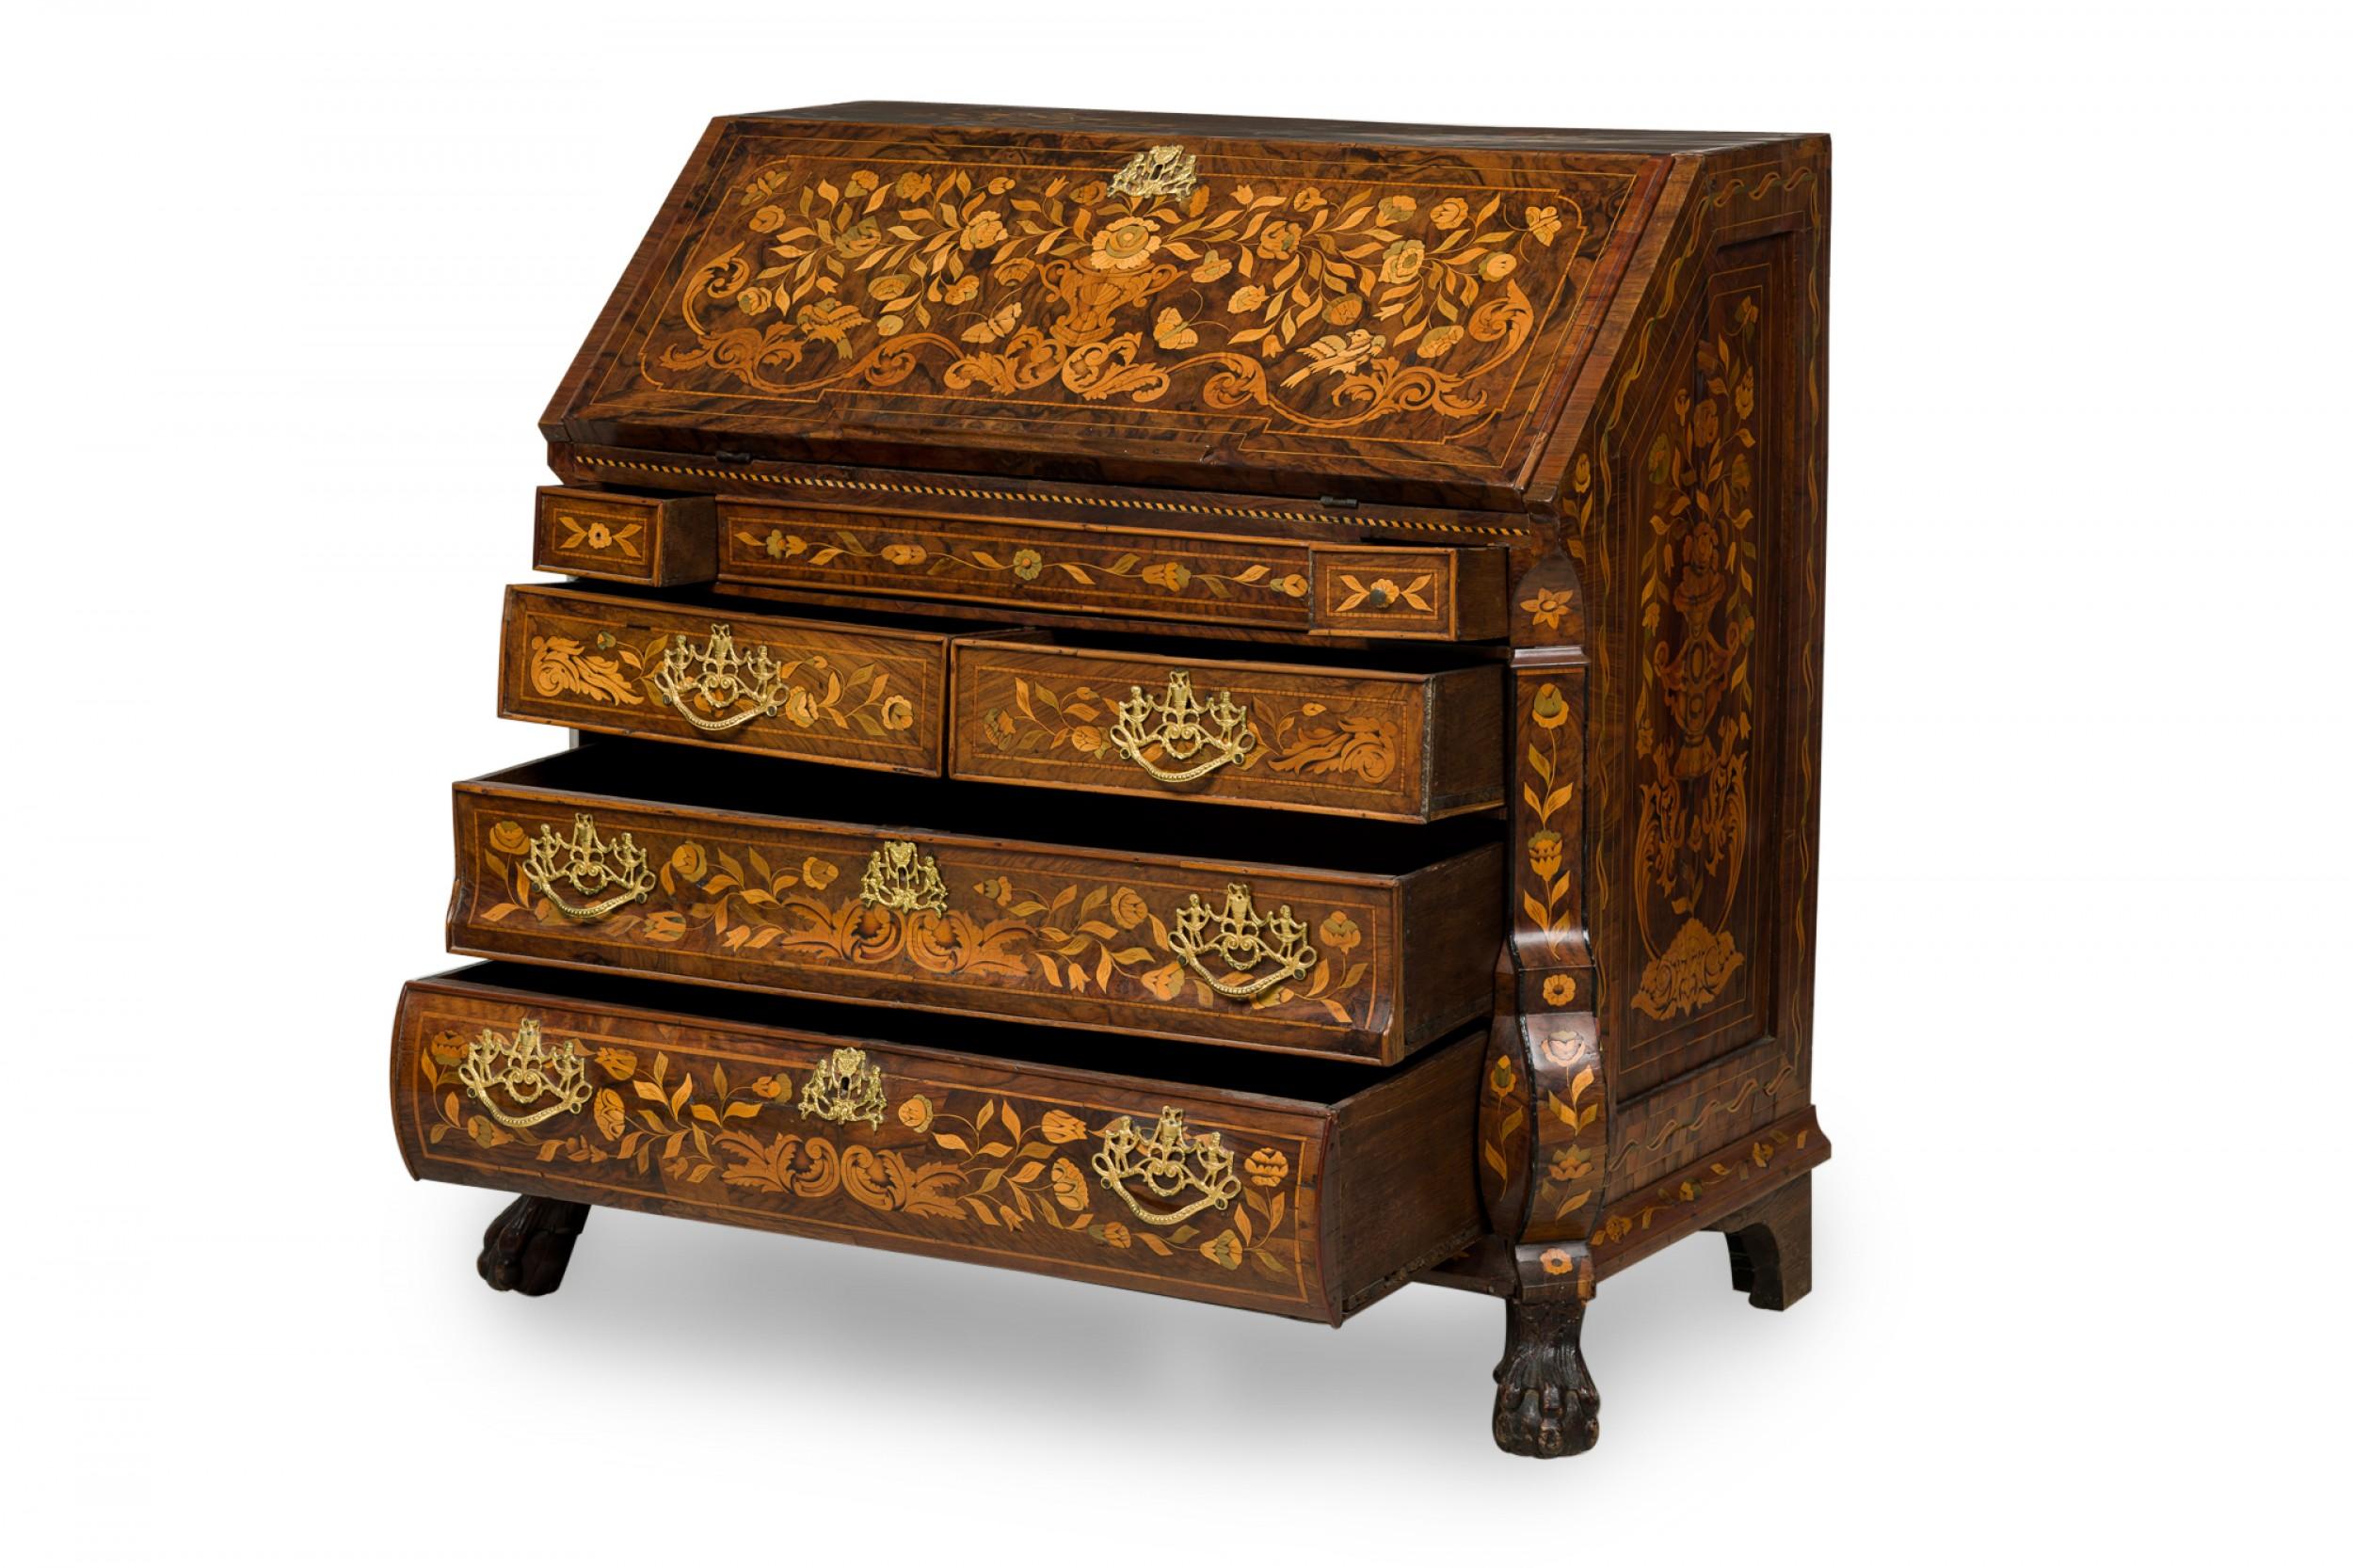 Dutch Rococo Bombe Marquetry Inlaid Drop Front Desk / Secretary In Good Condition For Sale In New York, NY